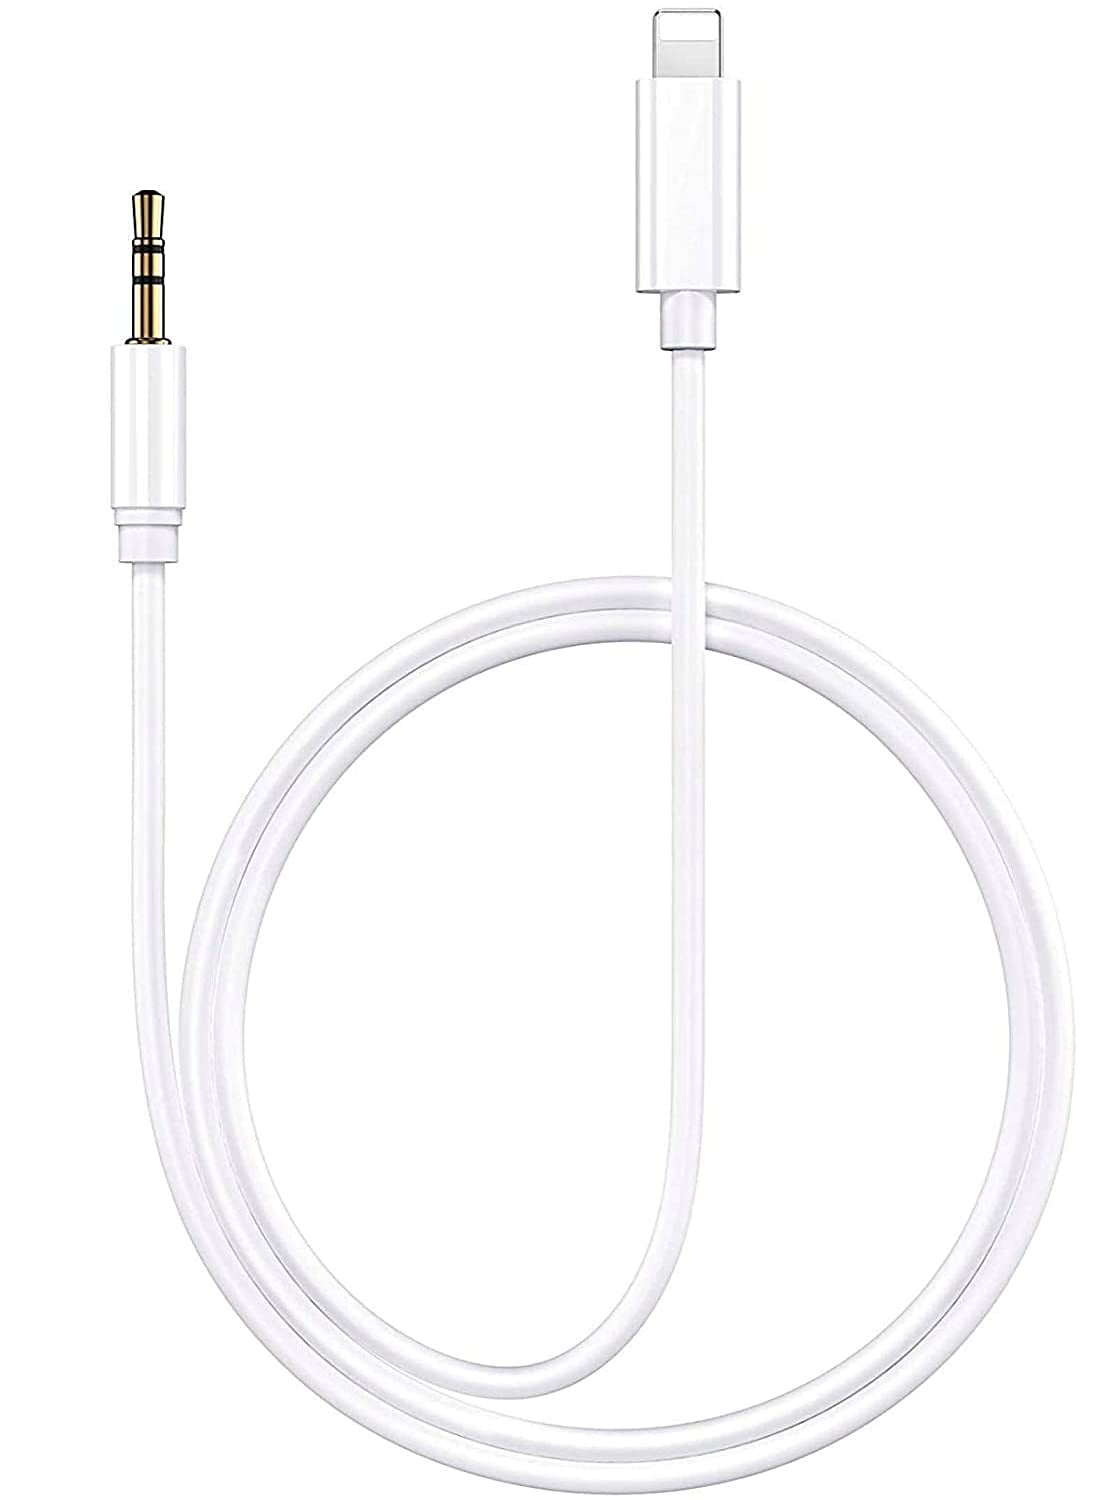 Support All iOS Version White-1 Pack Aux Cord Compatible with iPhone,3.5 mm Headphone Jack Adapter Male Audio Cord Compatible with iPhone 11/XS/XR/X/8/7 for Car/Home Stereo,Speaker,Headphone 